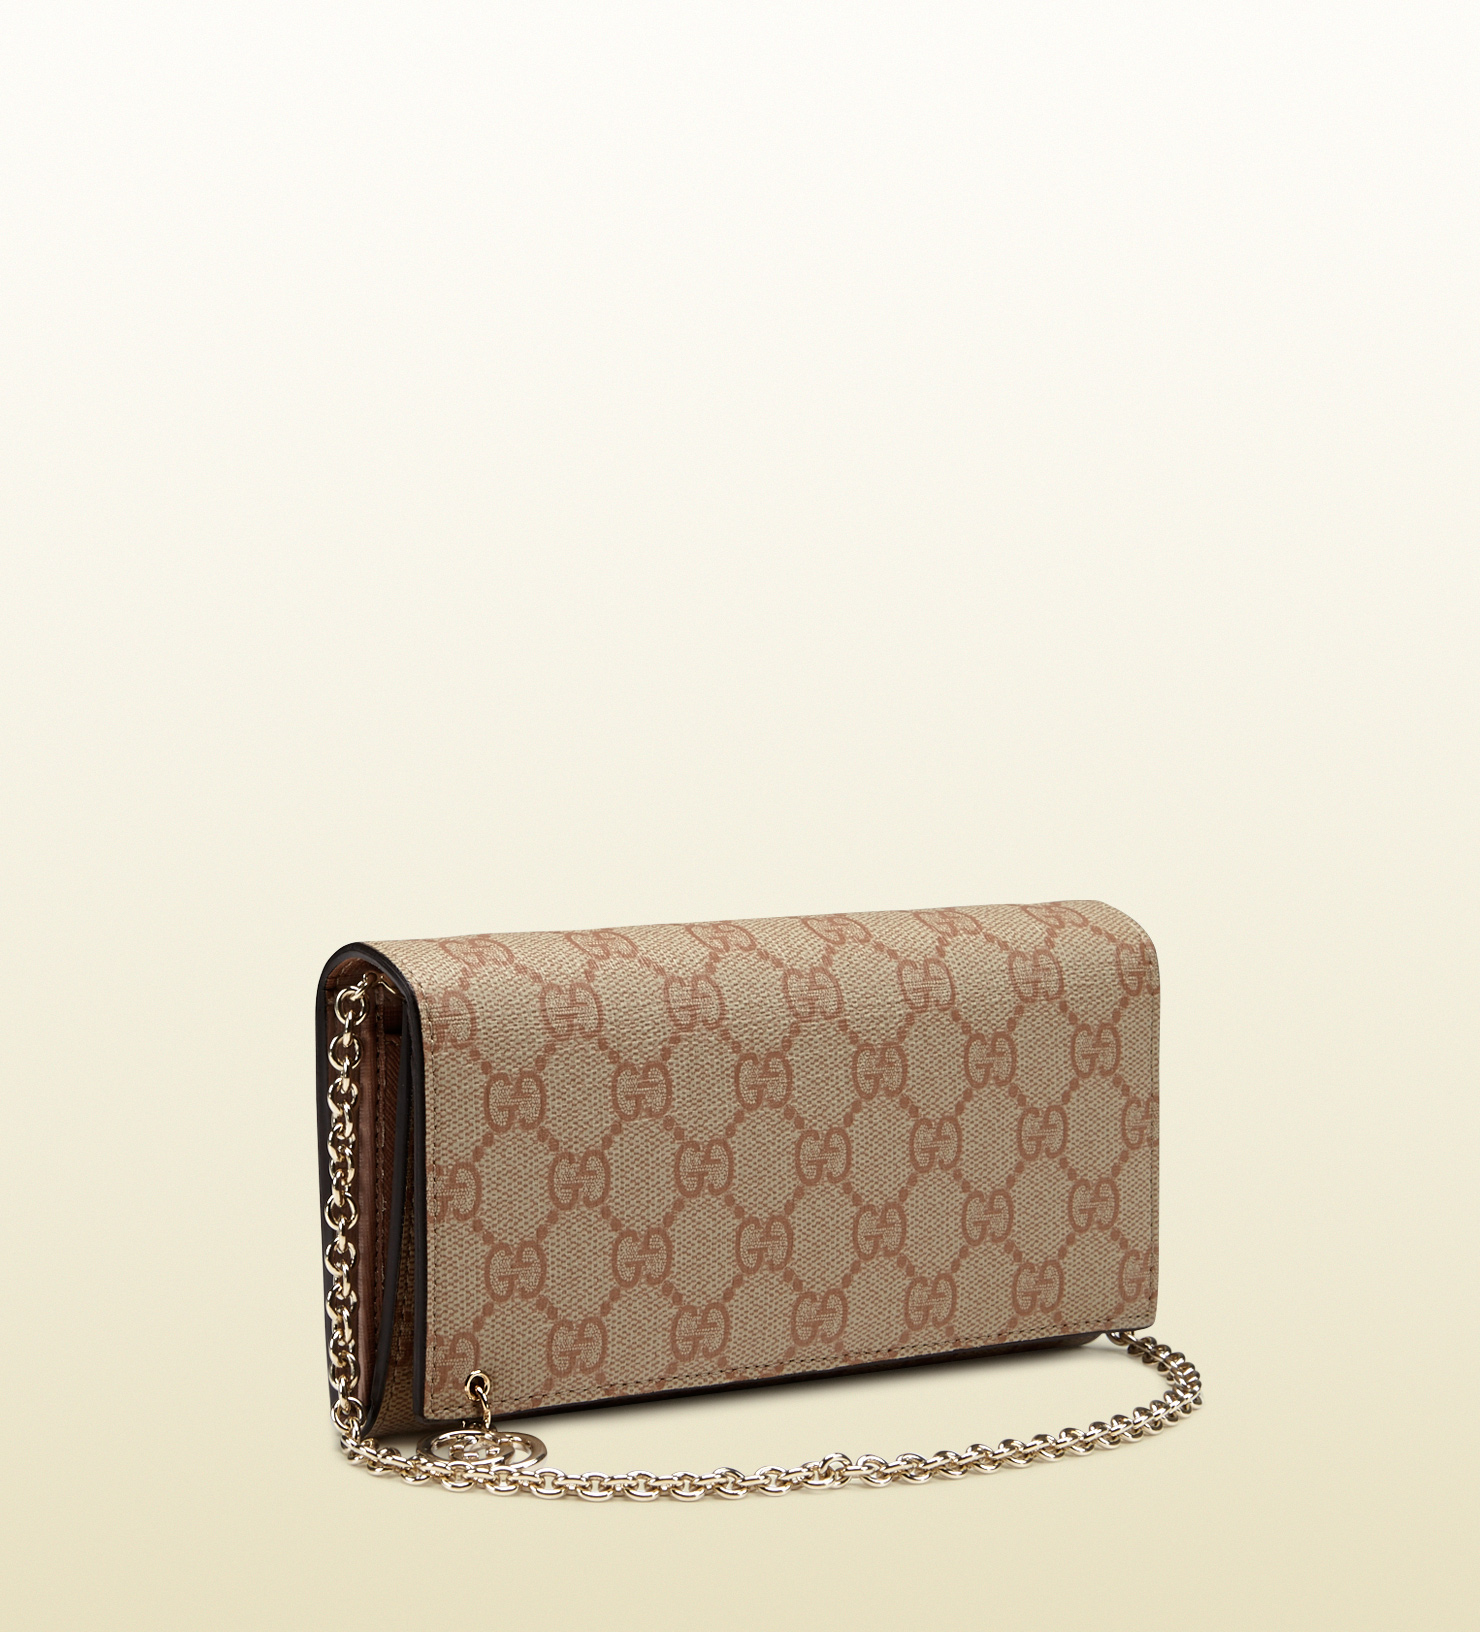 Gucci Gg Supreme Canvas Chain Wallet in Beige (Natural) - Lyst